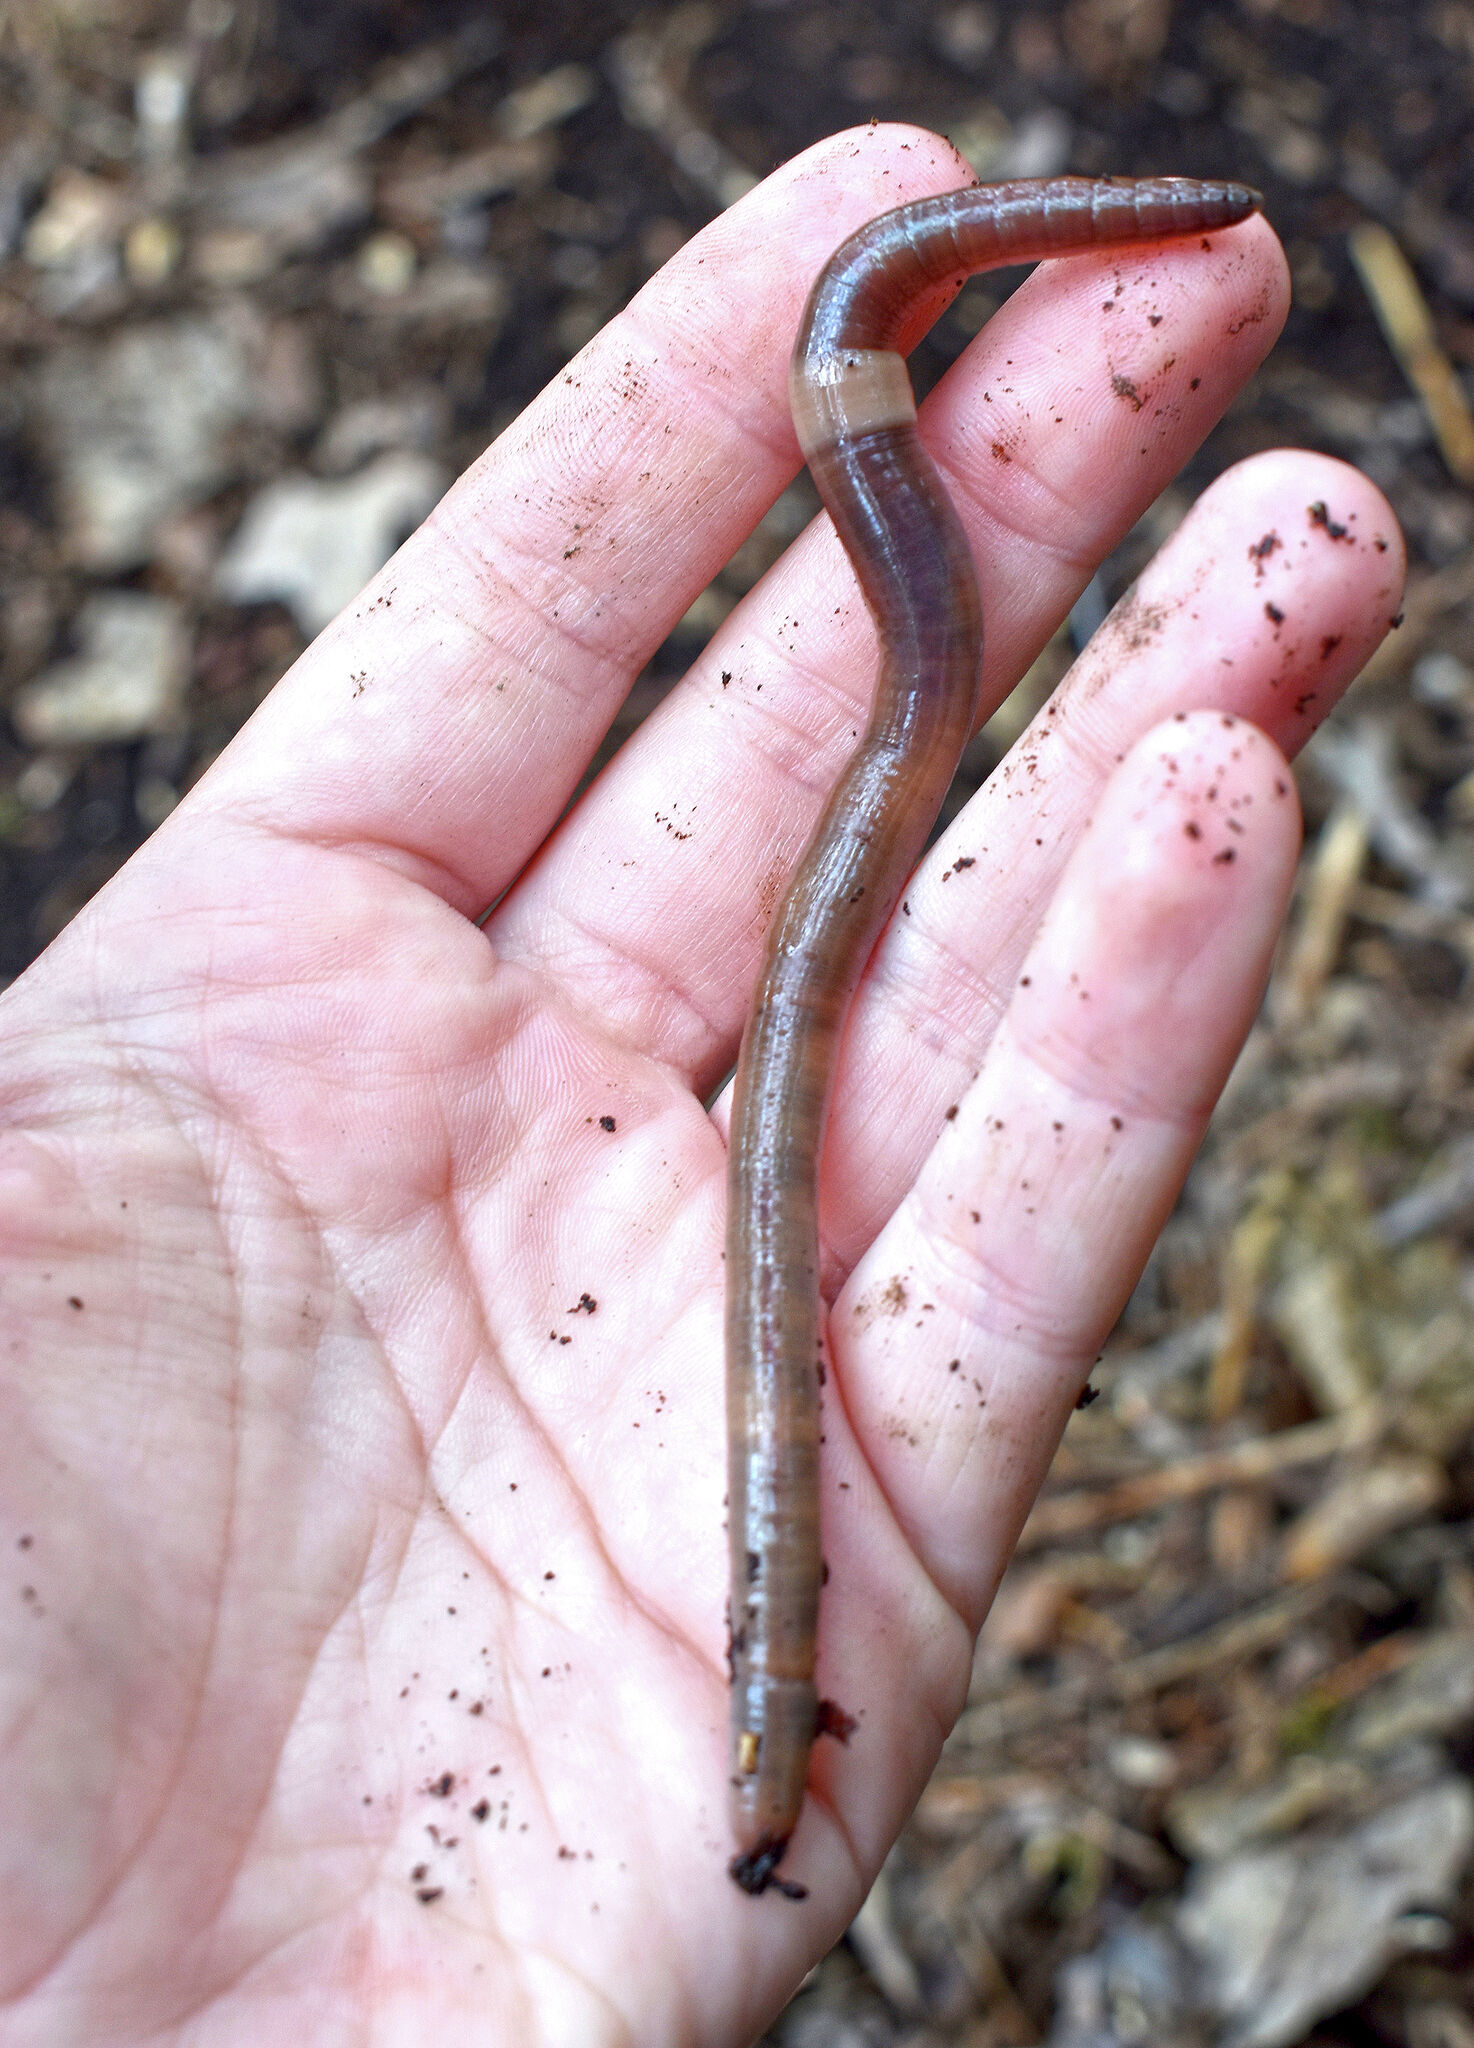 The new invasive garden threat? A slithering, jumping worm